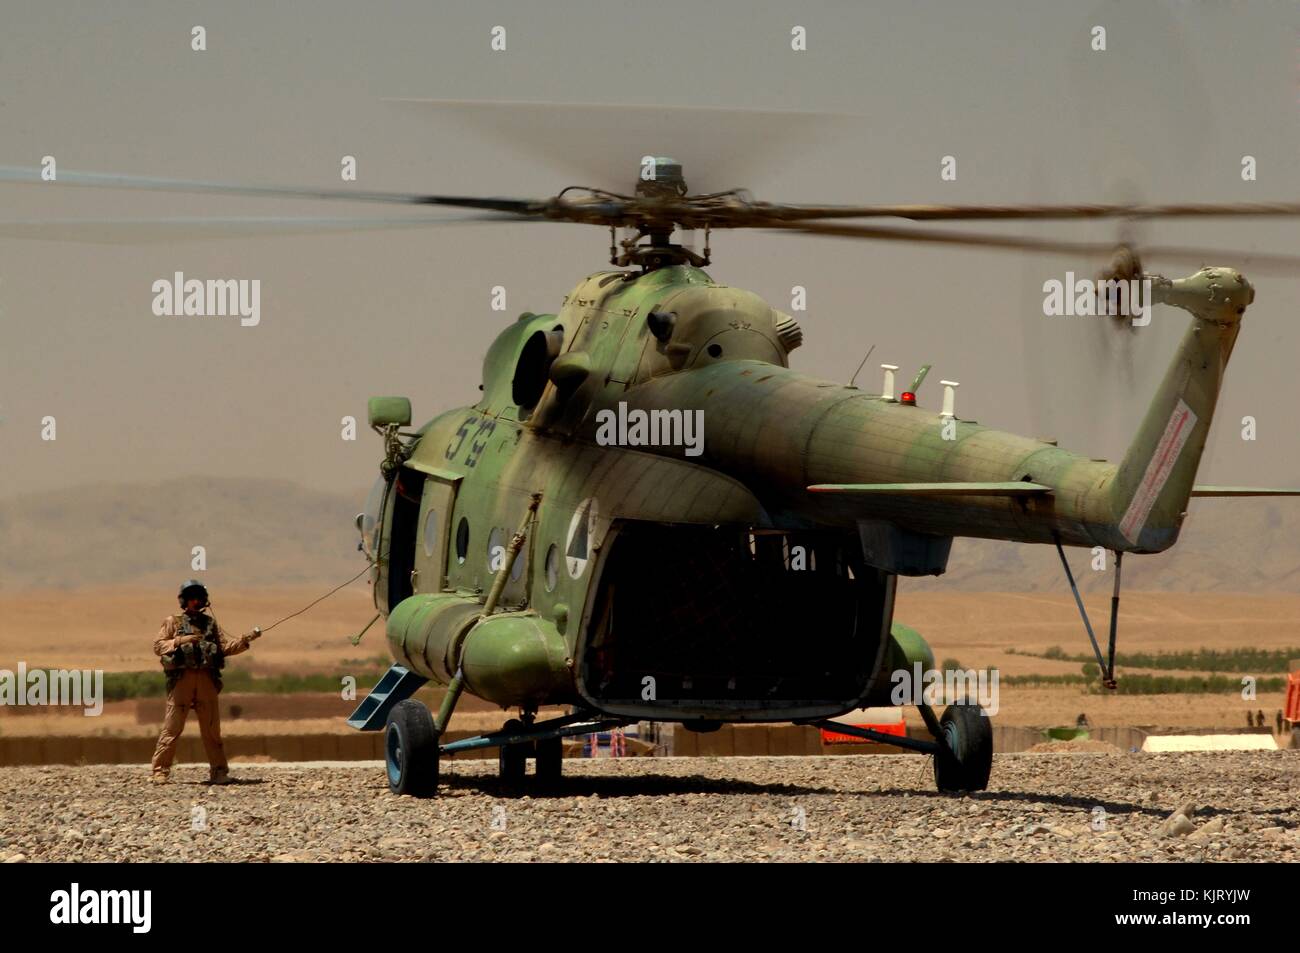 An Afghan National Army MI-17 helicopter waits to pick up soldiers during a battlefield circulation June 22, 2010 in the Uruzgan province, Afghanistan.  (photo by Kenny Holston via Planetpix) Stock Photo